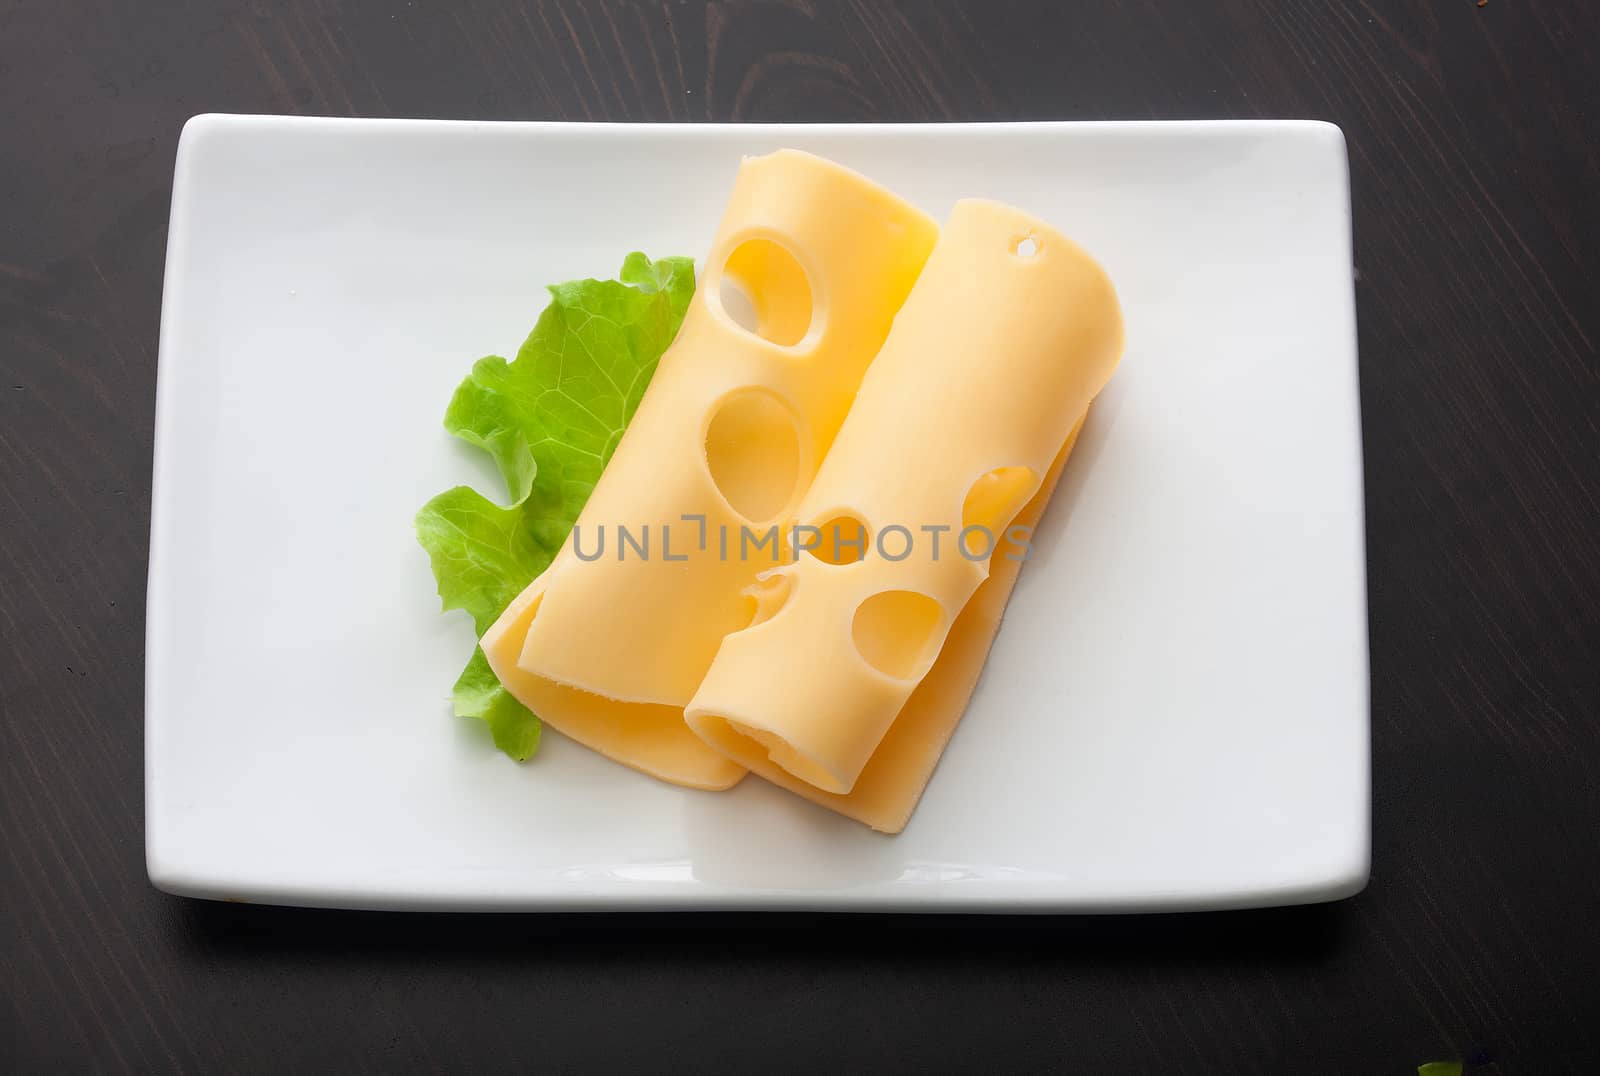 Top view of white plate with two pieces of maasdam cheese and leaf of grenn fresh lettuce